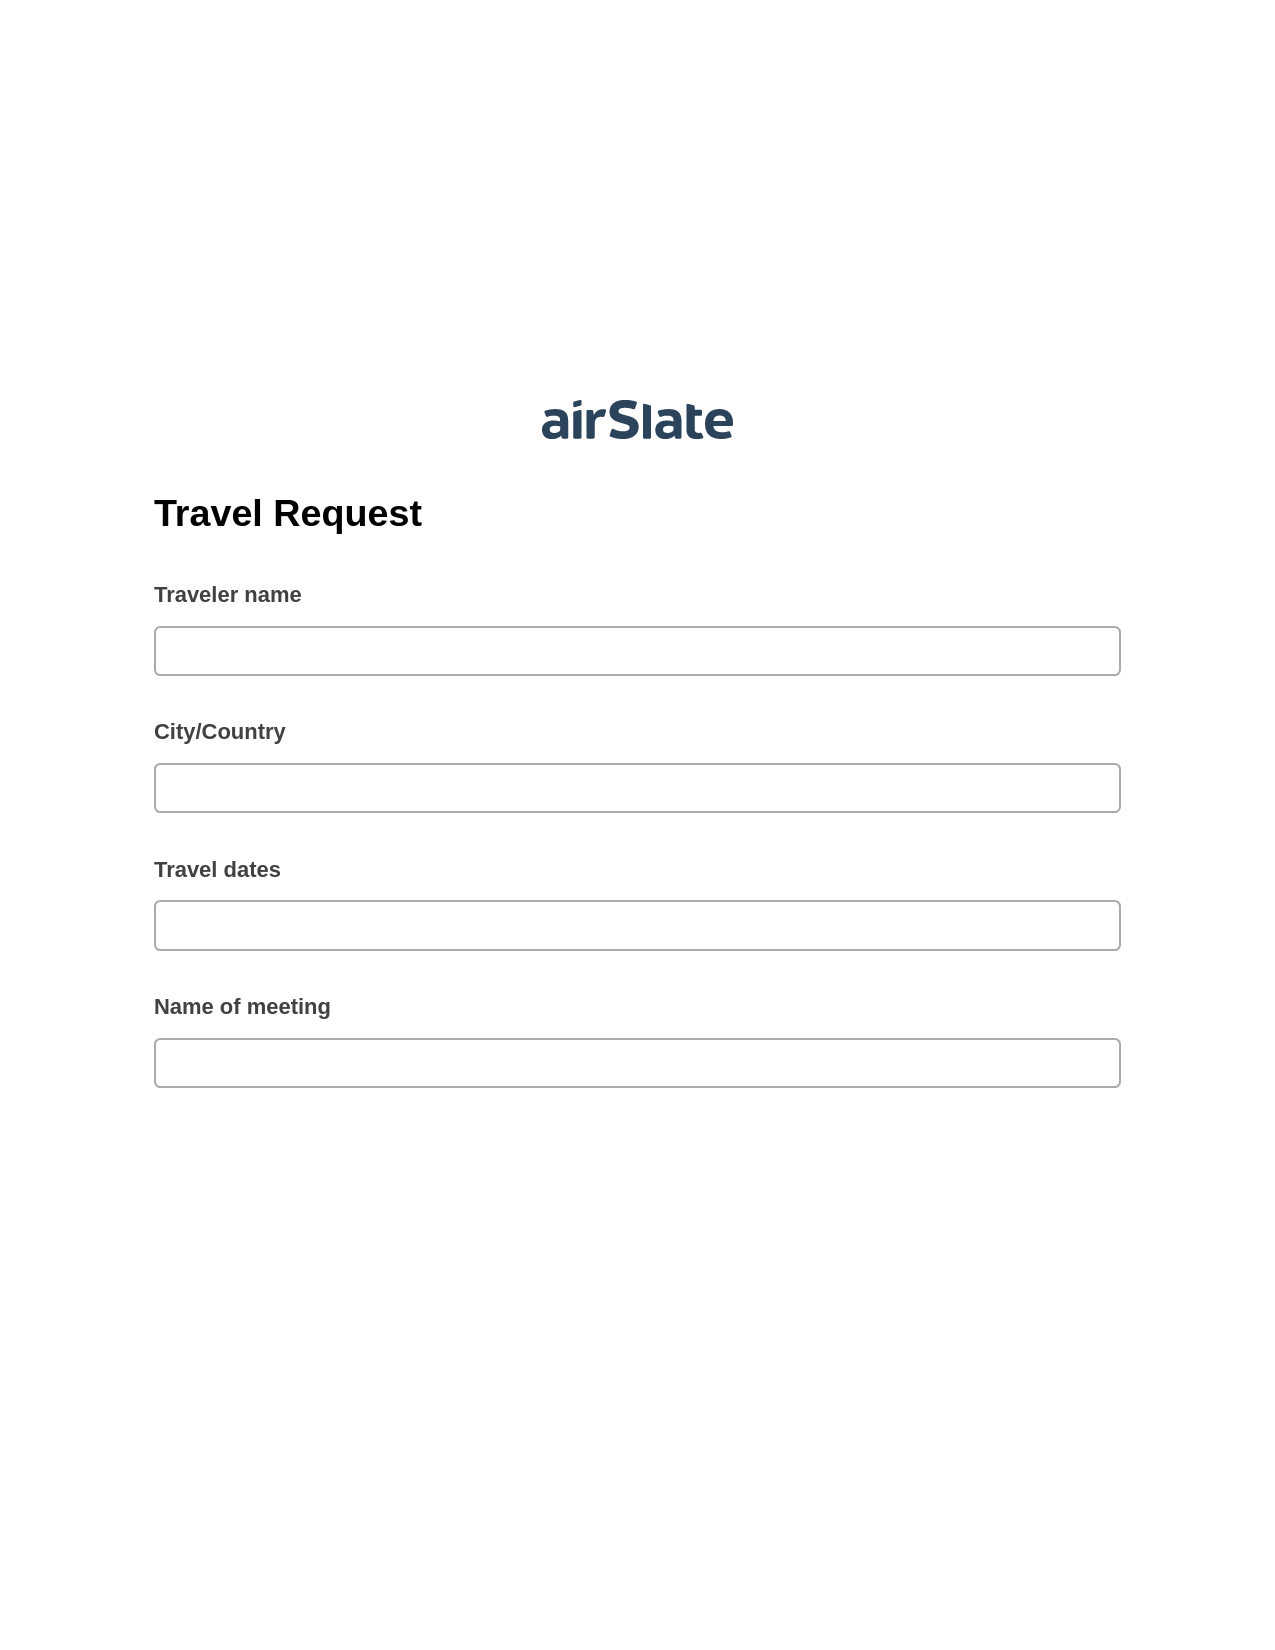 Travel Request Pre-fill Slate from MS Dynamics 365 Records Bot, Create Slate Reminder Bot, Export to Smartsheet